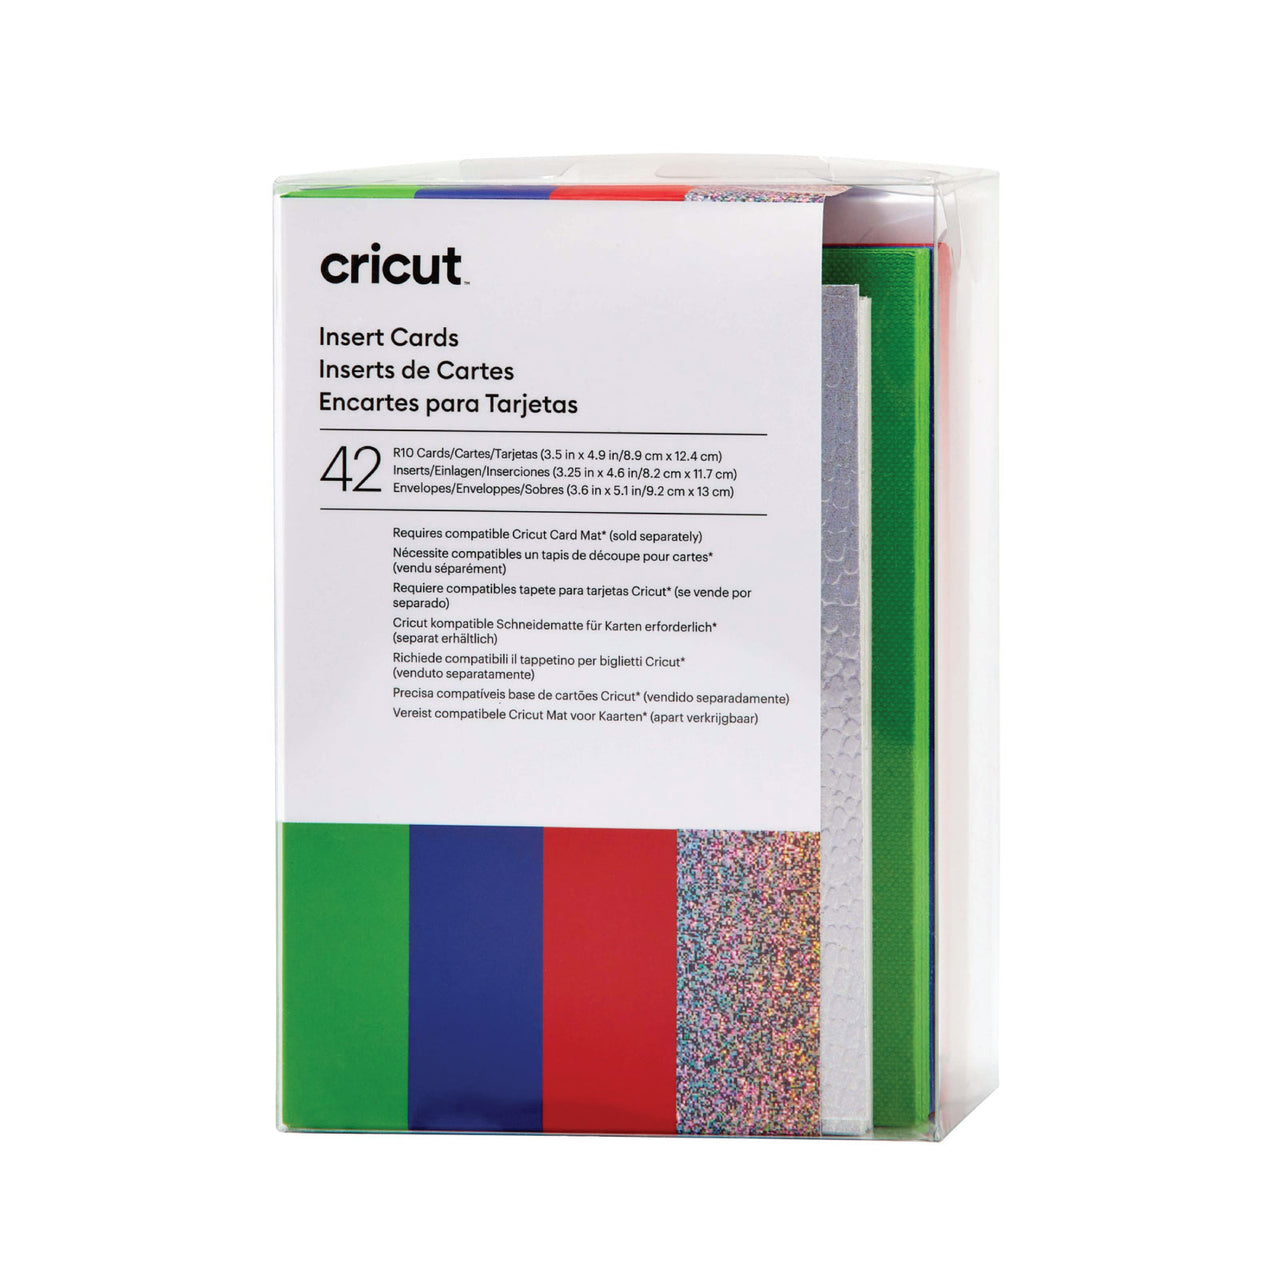 Cricut Insert Cards, Rainbow Scales Sampler - R10 42 ct - Damaged Package